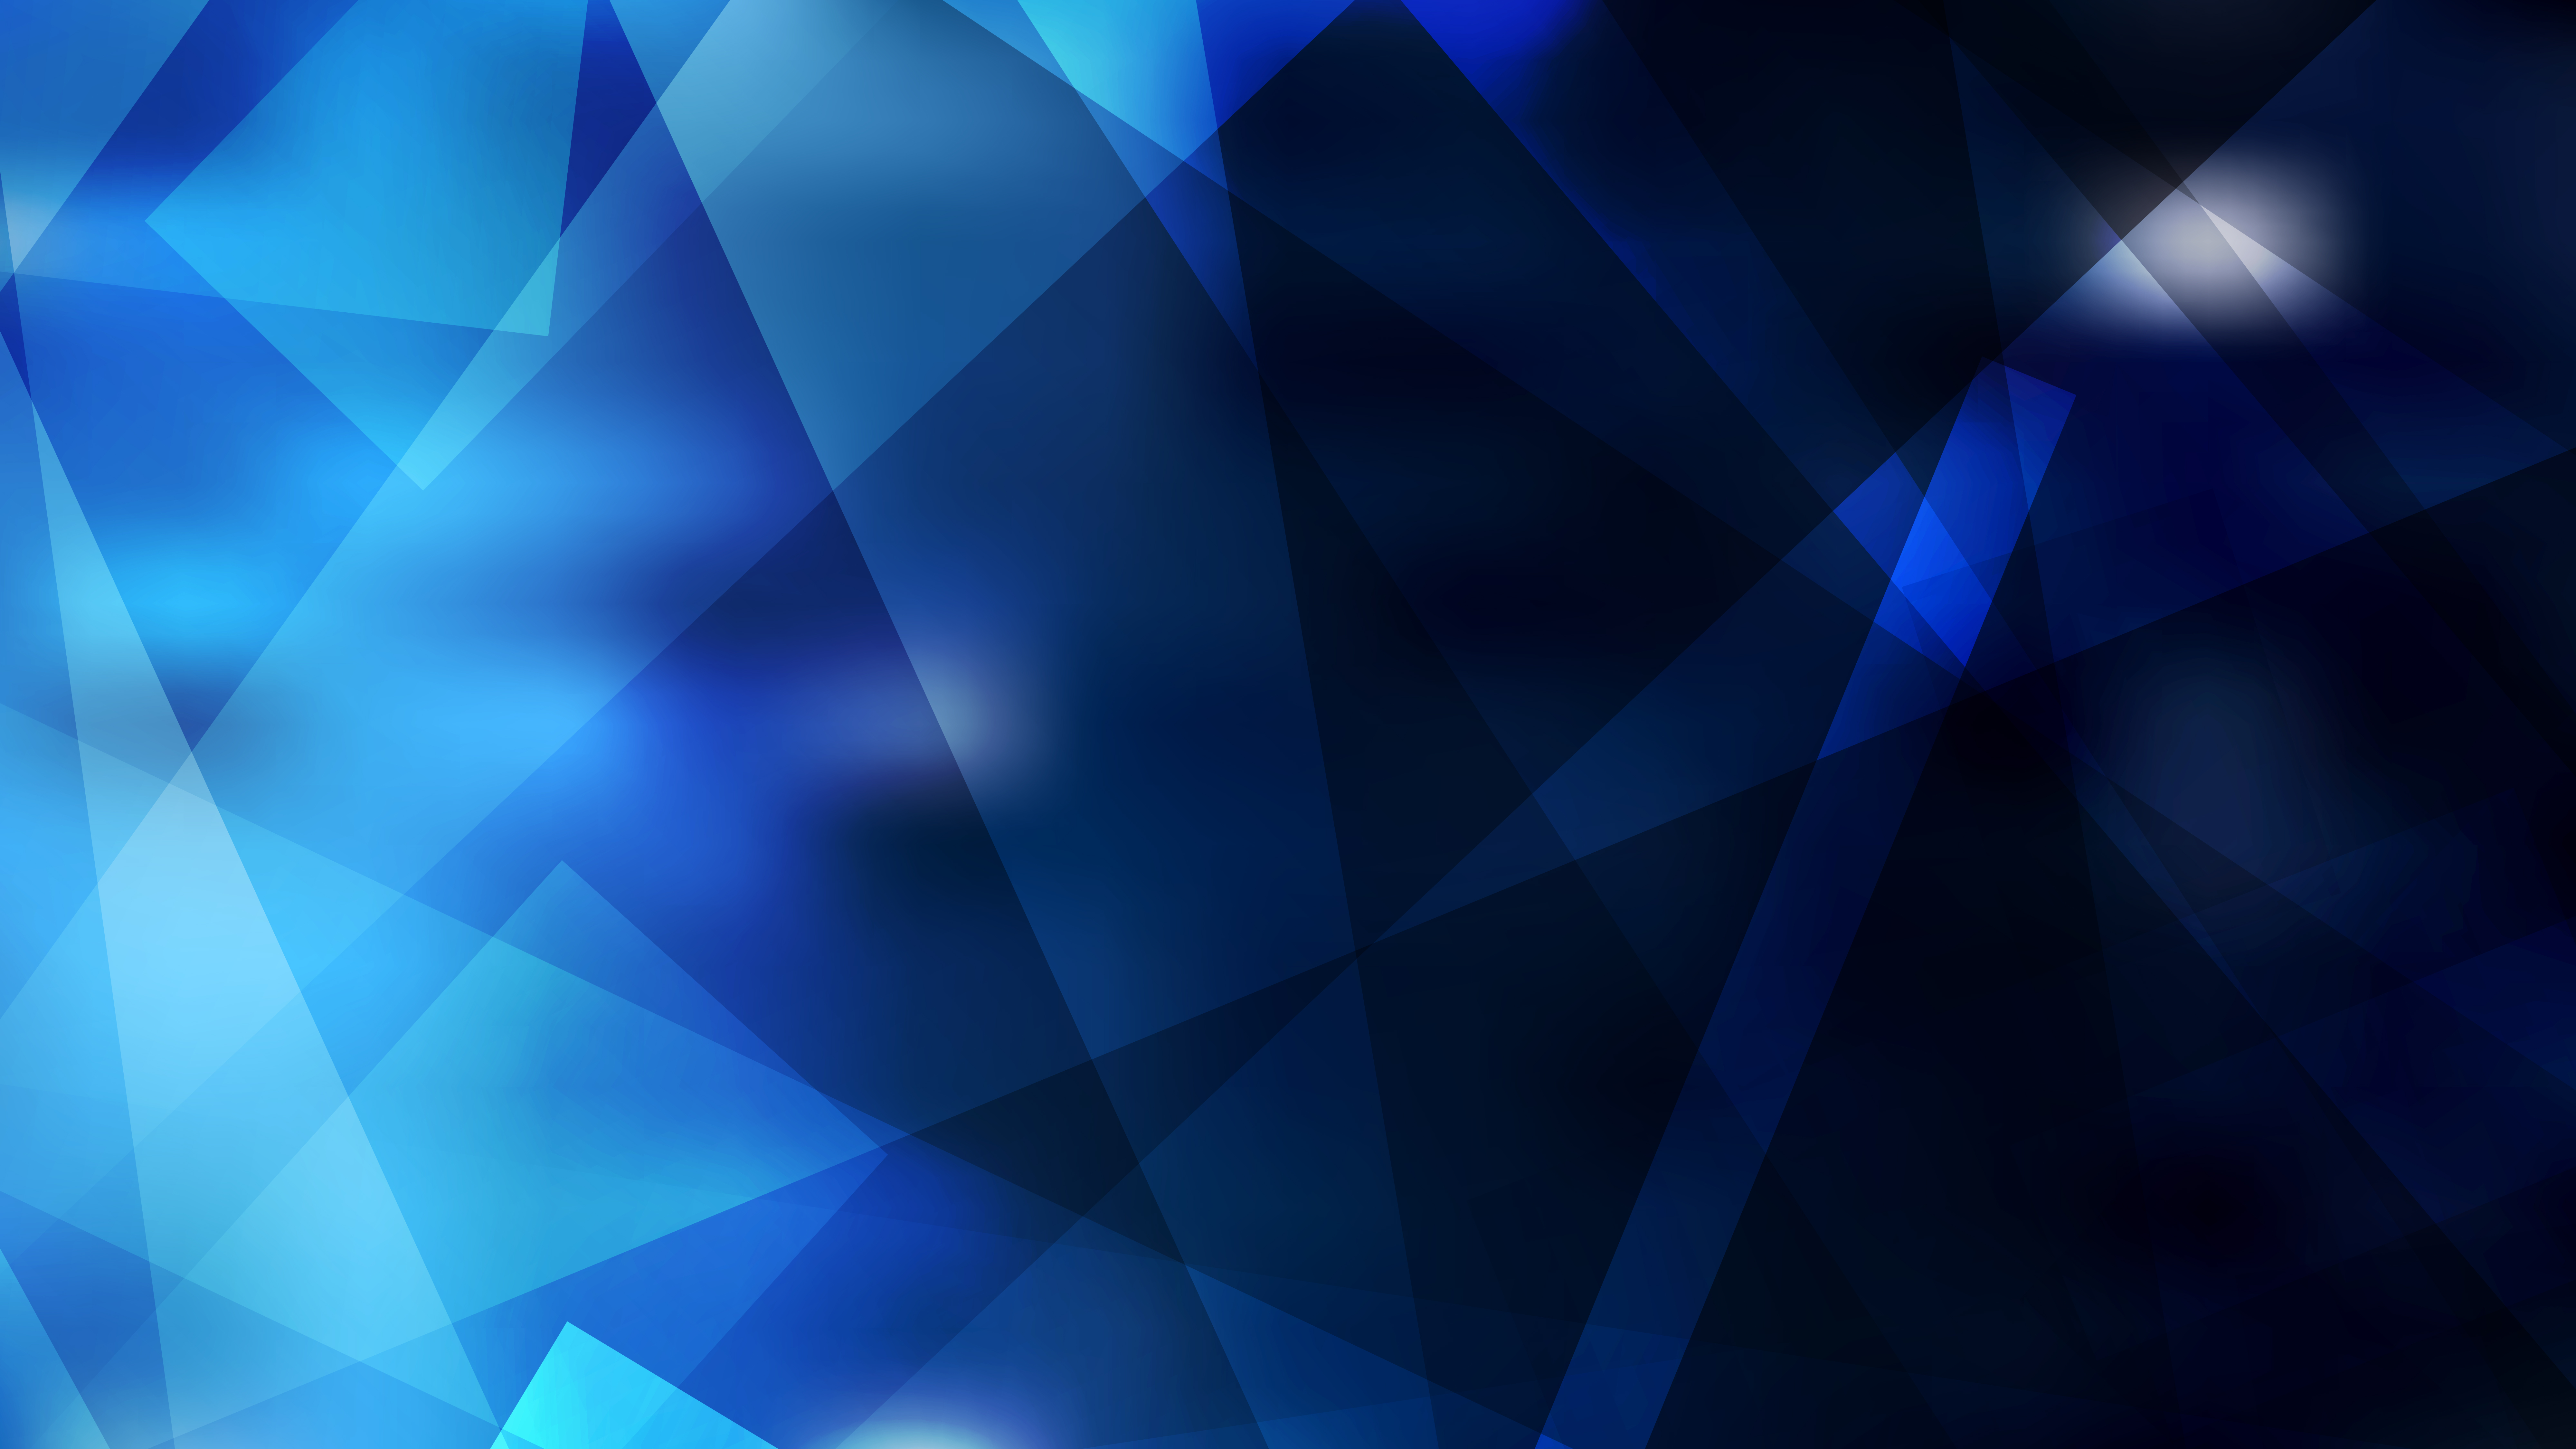 Free Black and Blue Geometric Abstract Background Vector Illustration